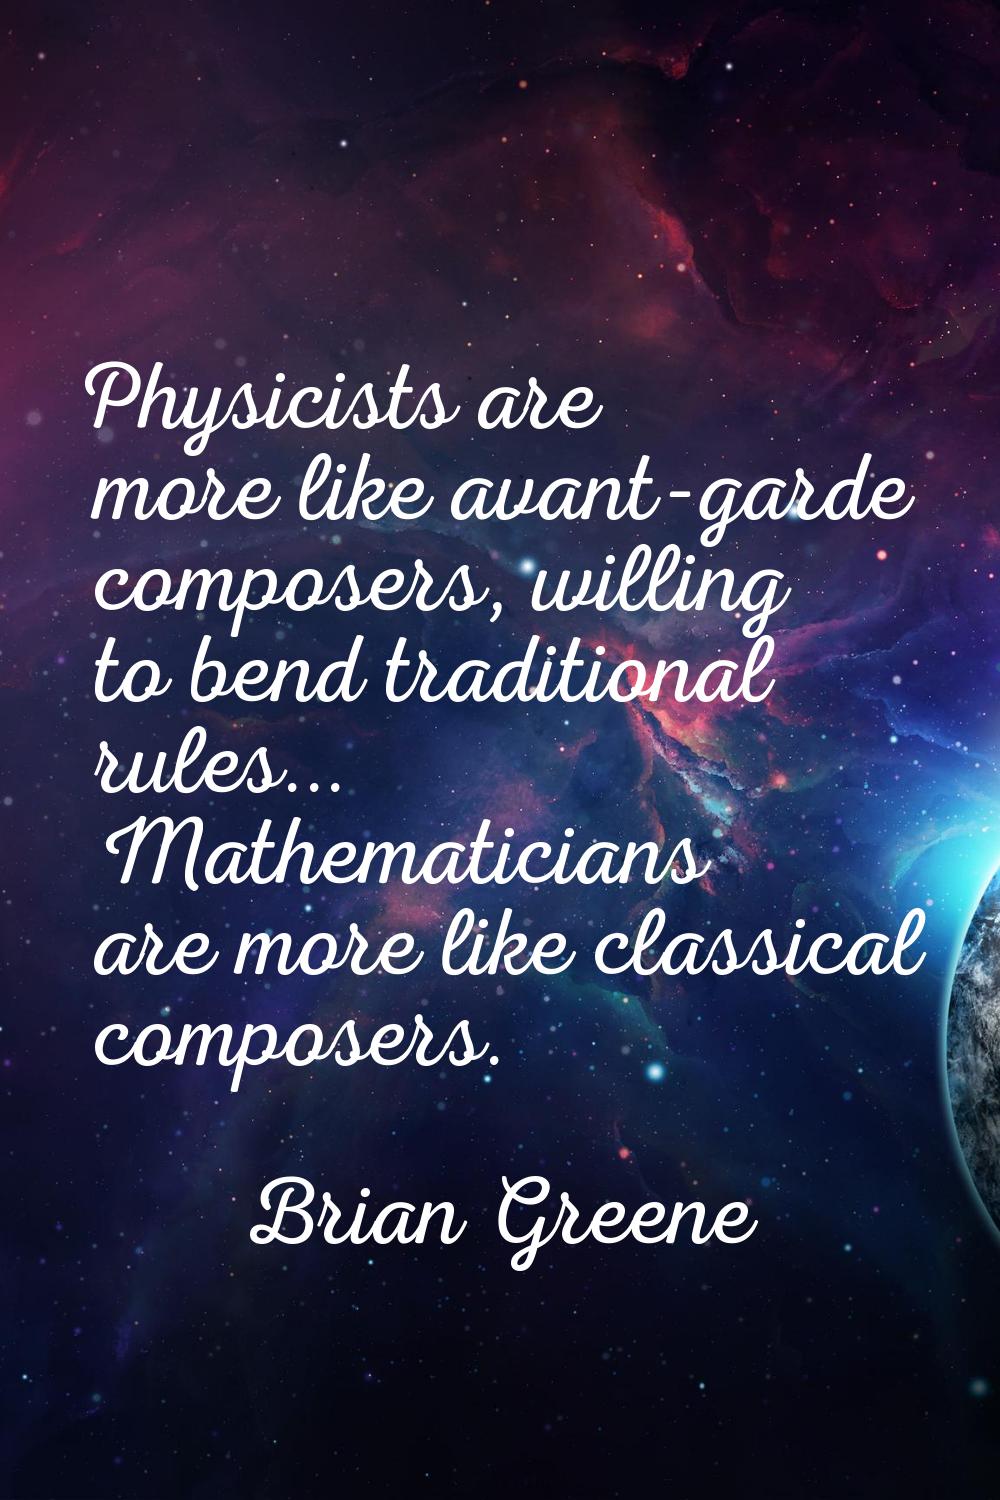 Physicists are more like avant-garde composers, willing to bend traditional rules... Mathematicians